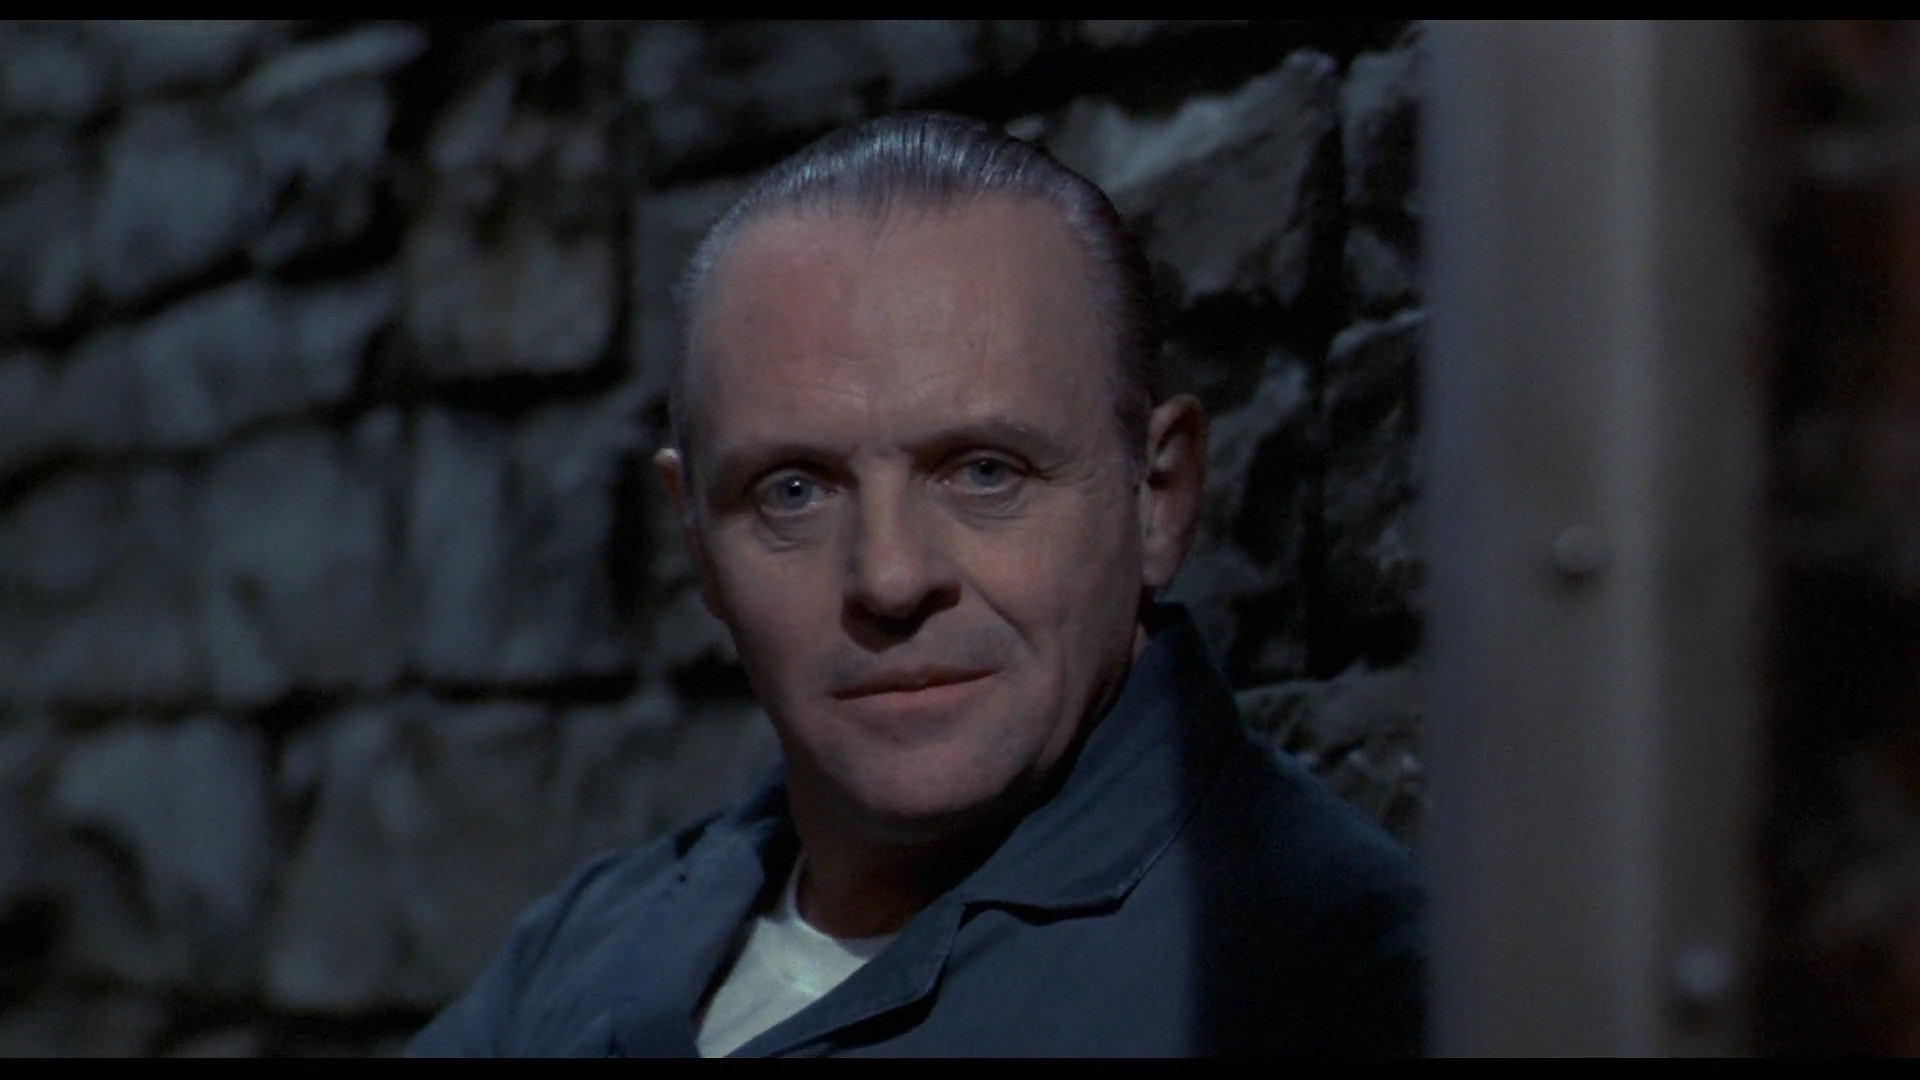 1920x1080 Download The Silence of the Lambs 1991 BluRay 1080p x264 AC3 LXGZ Torrent -  Fenopy.eu